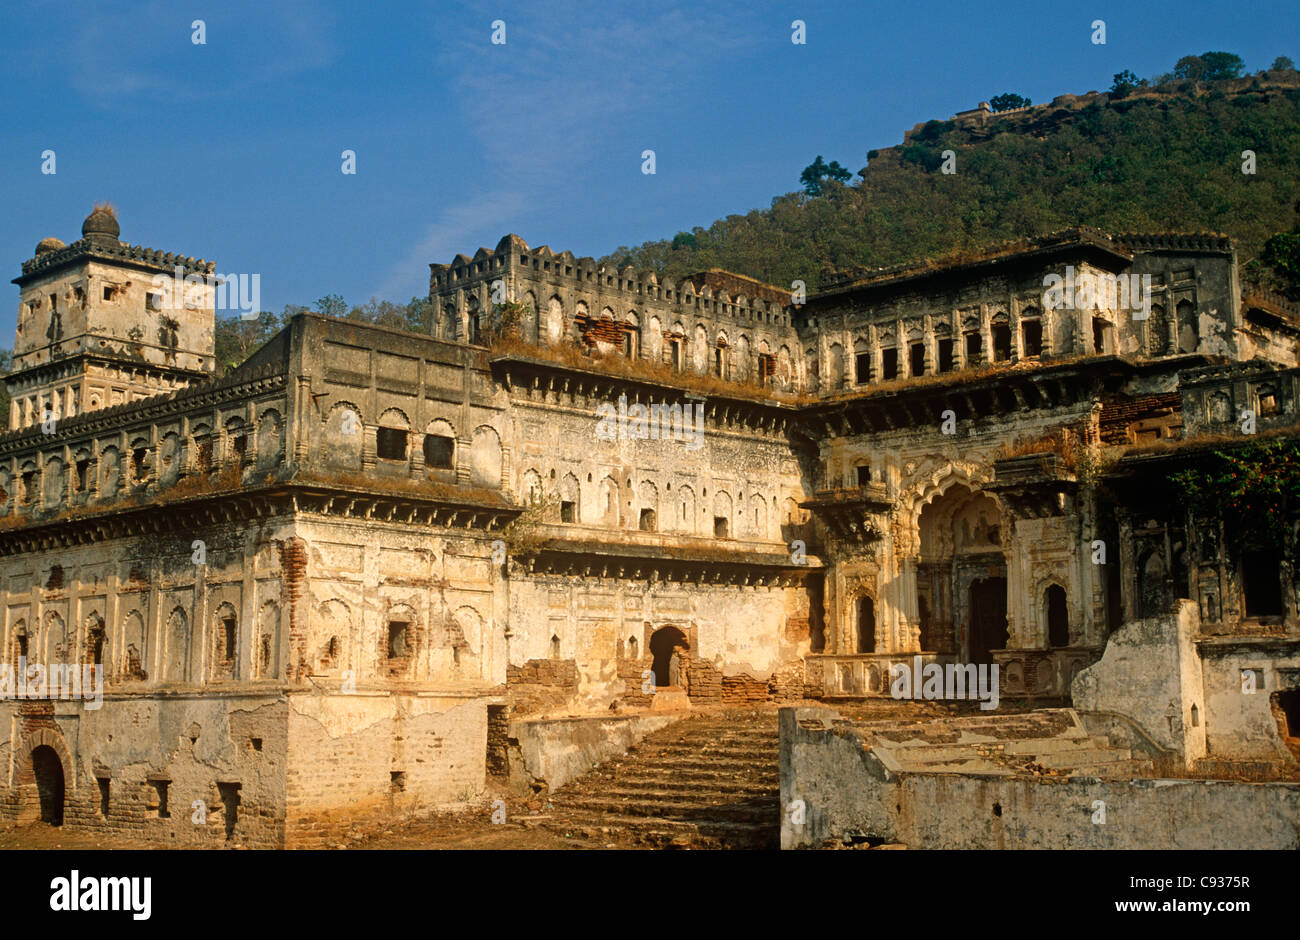 India, Madhya Pradesh, Ajaigarh. A now abandoned palace complex lies at the foot of Ajaigarh Fort. Stock Photo